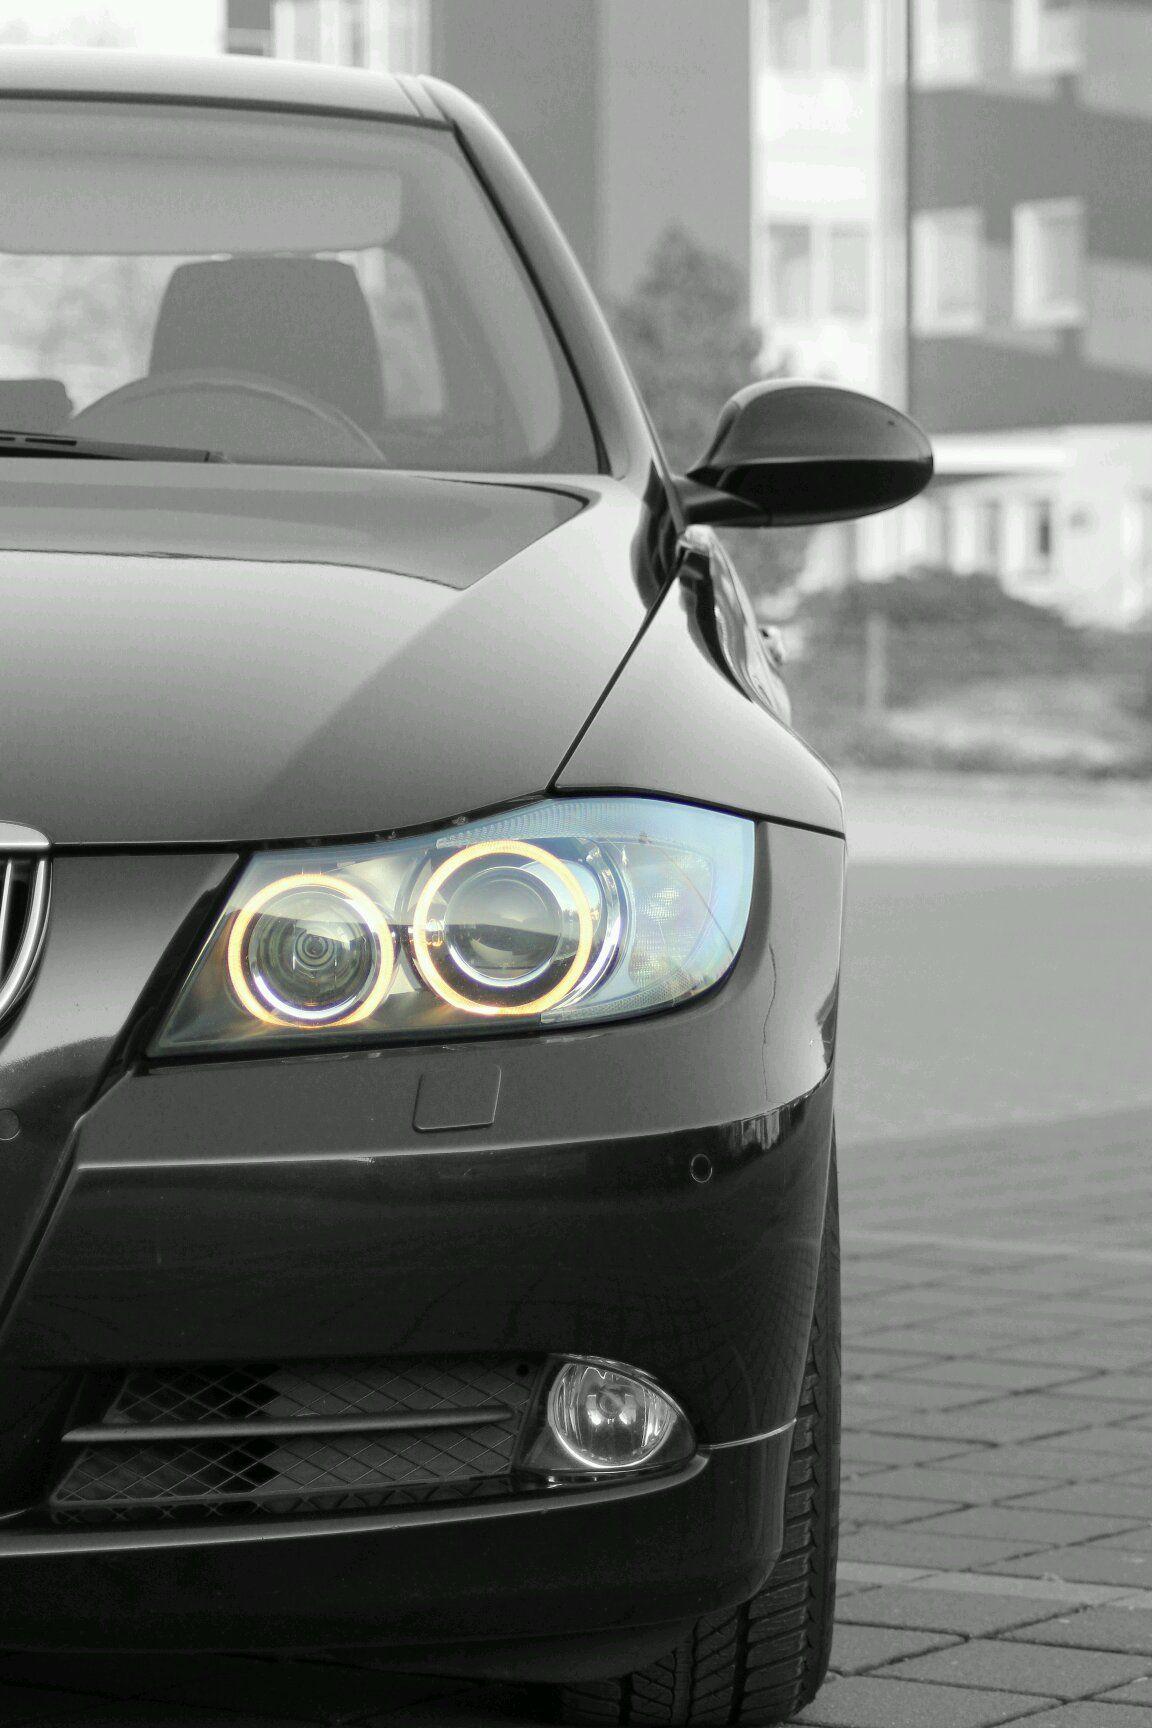 BMW E90 phone wallpaper that I made today